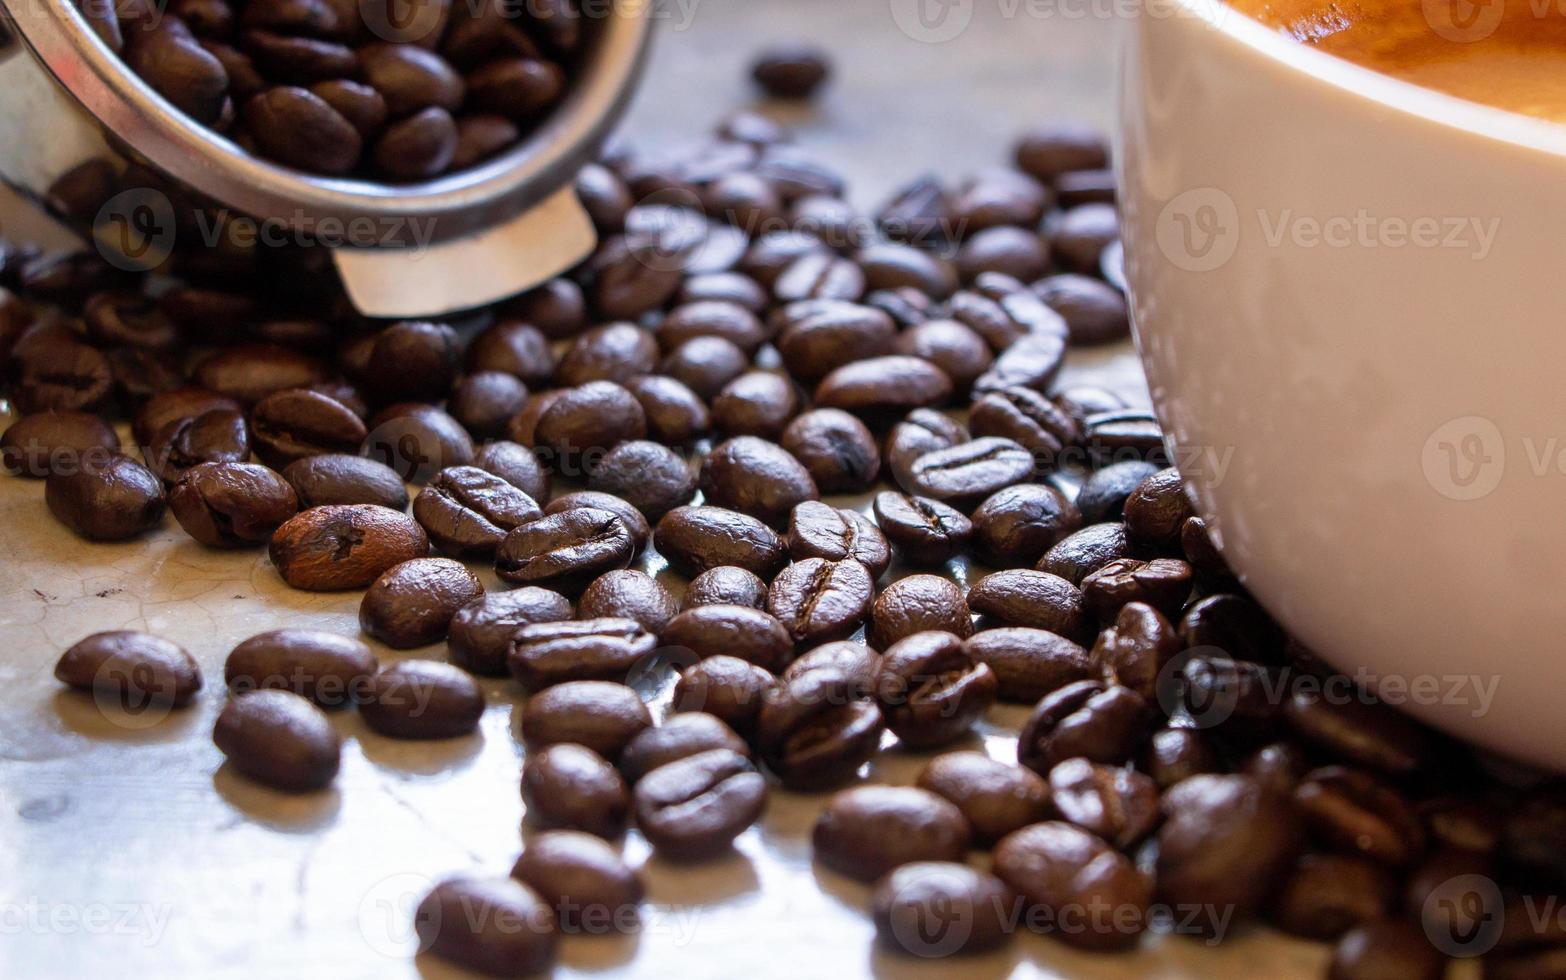 organic roasted arabica coffee beans on a concrete table between the basket of the filter holder and coffee cup. Focus on coffee beans in the middle of the pile photo